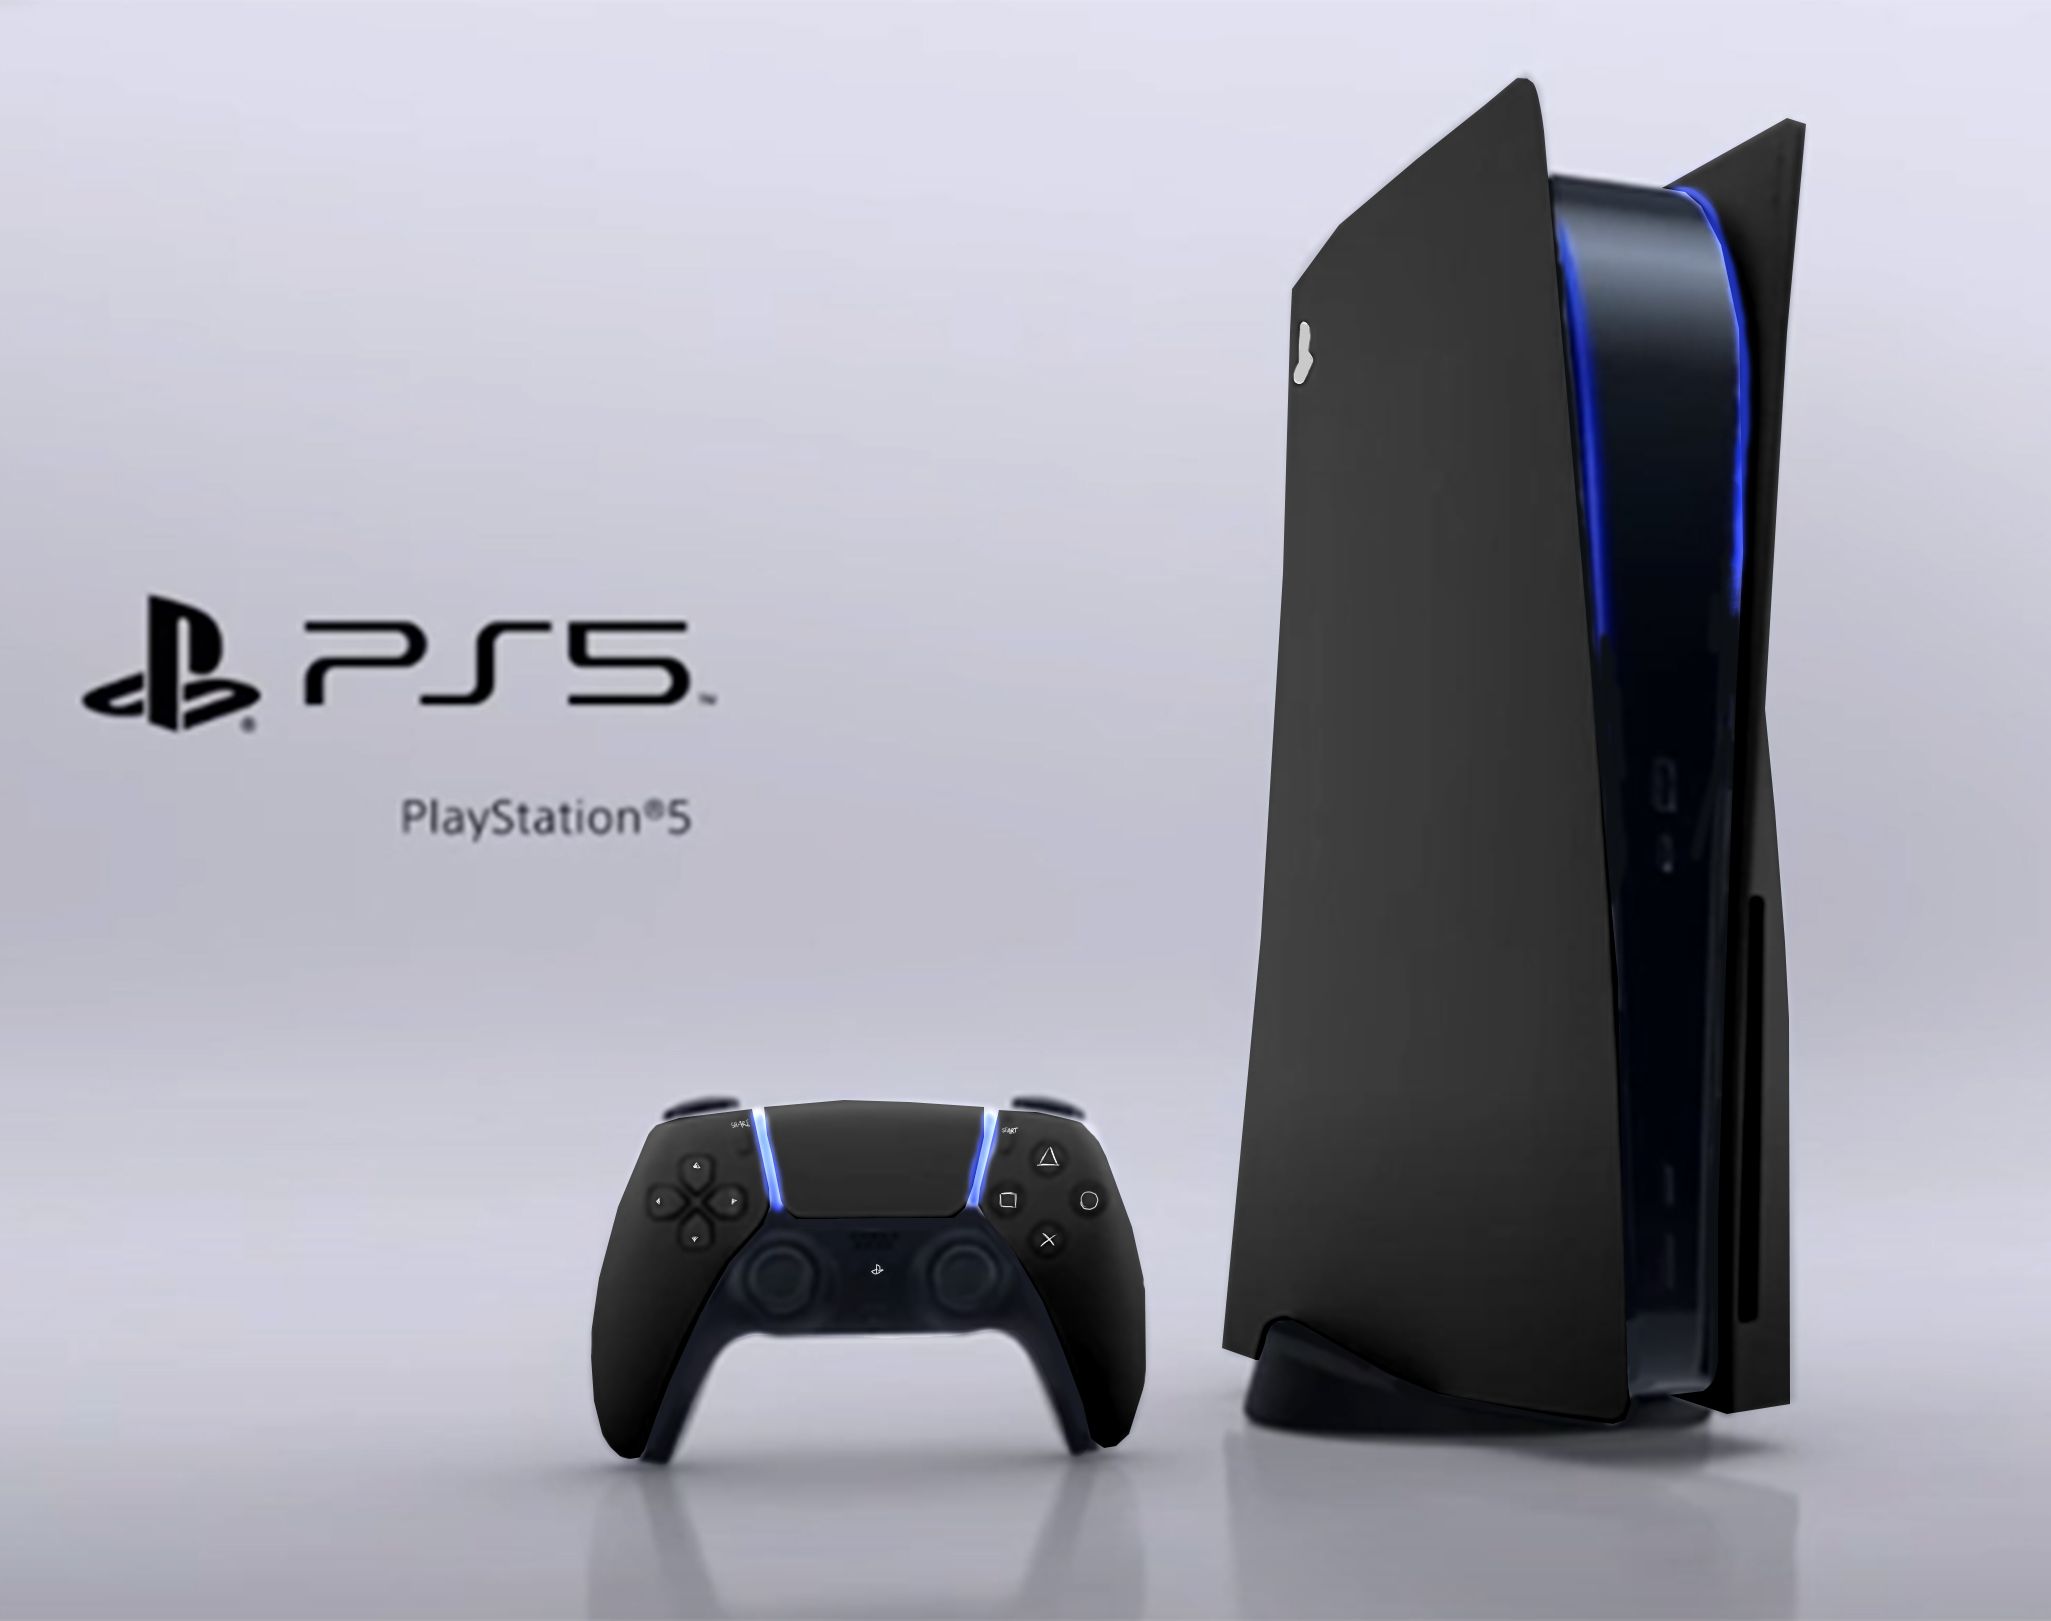 PS5 BLACK EDITION. Ps4 game console, Playstaion, Black edition